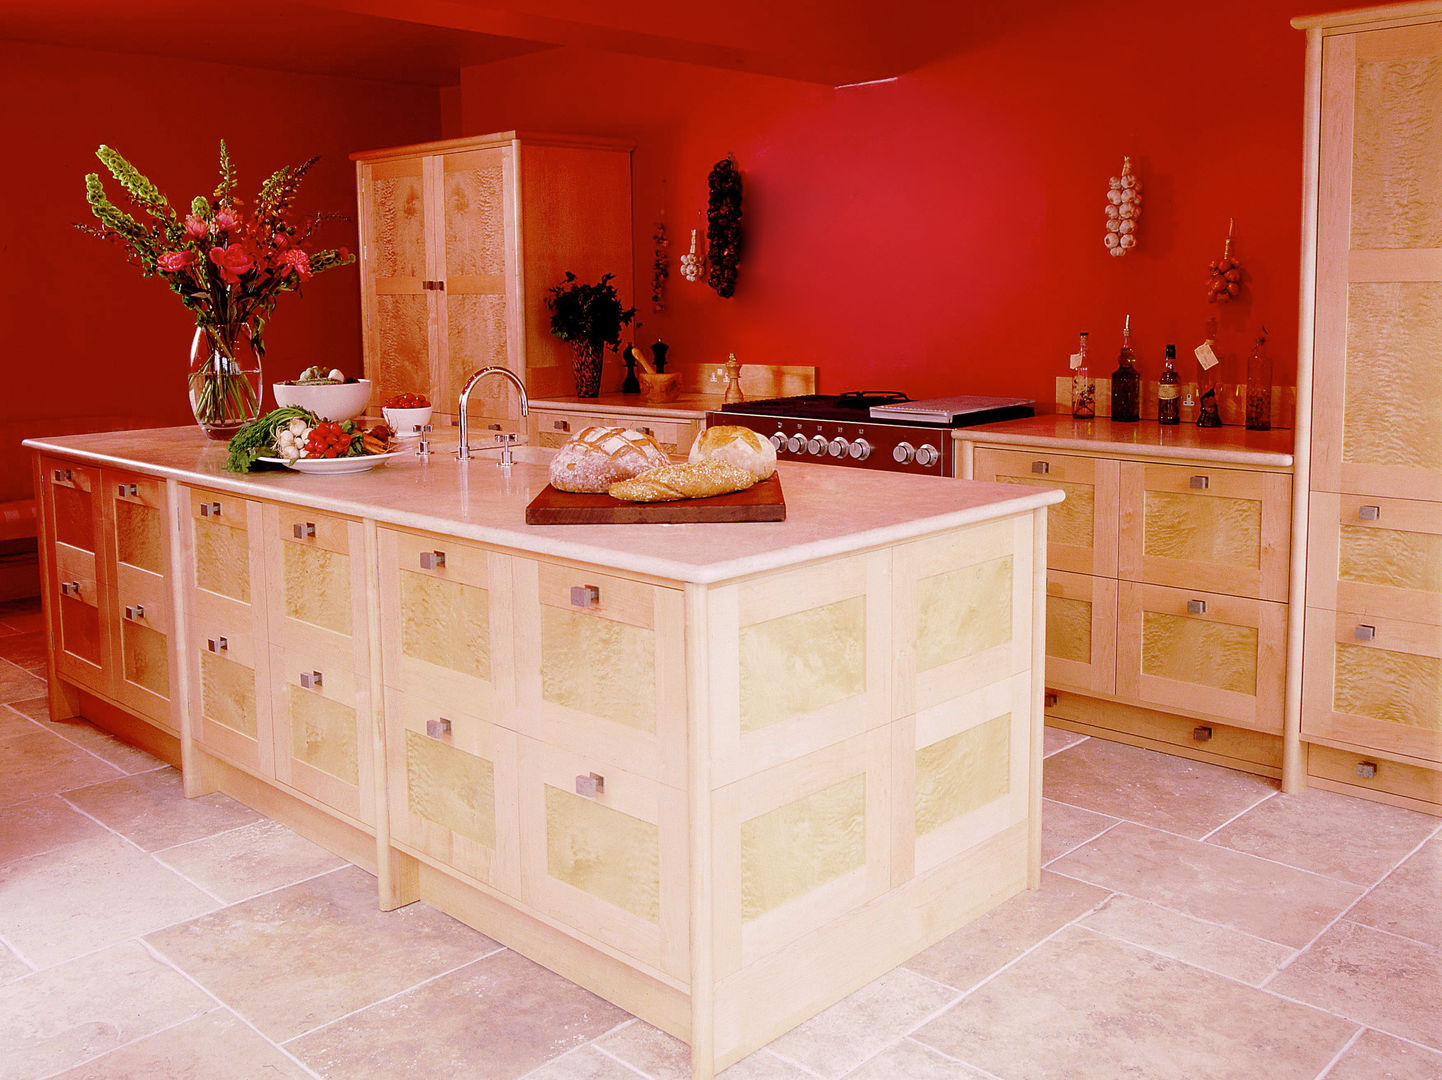 Quilted Maple Kitchen with Red Wall designed and made by Tim Wood Tim Wood Limited مطبخ رفوف وأدراج